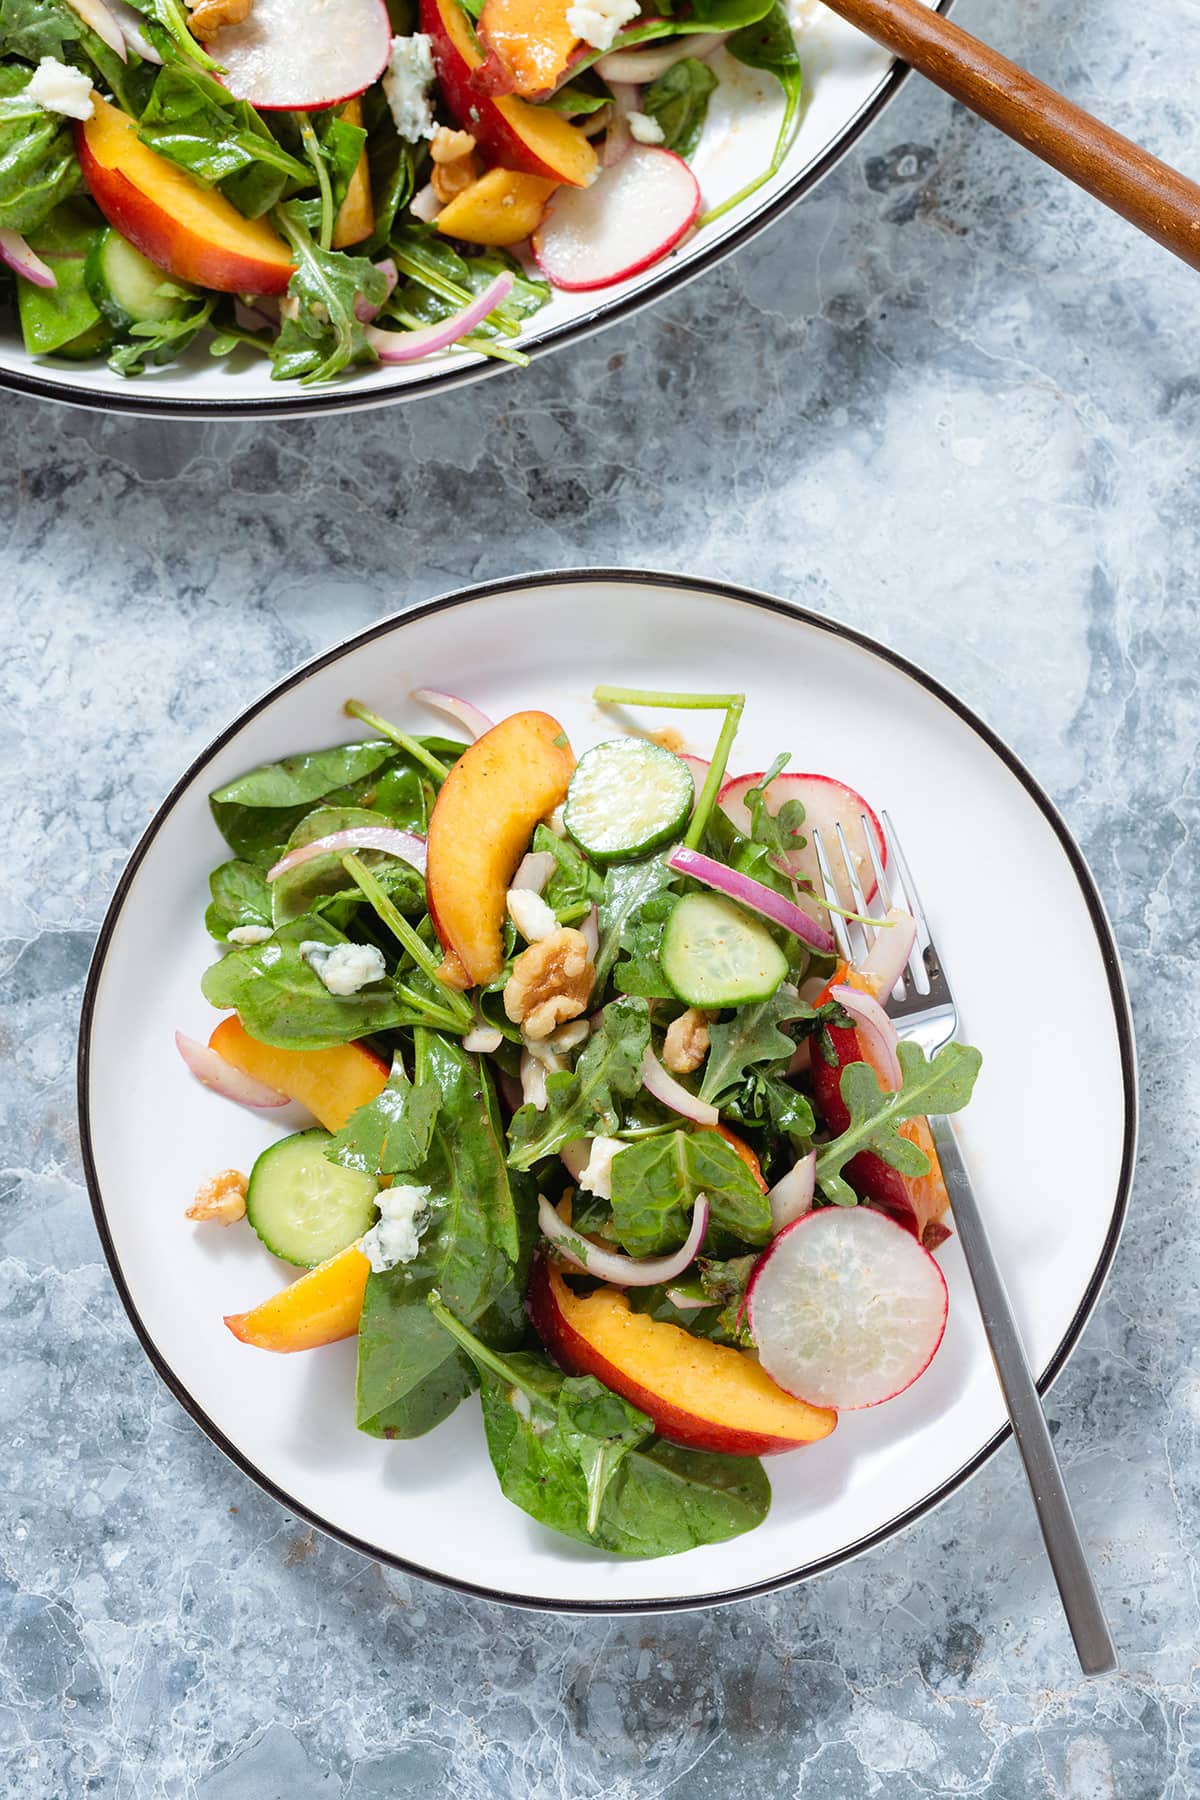 Nectarine salad with mixed greens, red onion, cucumbers, radishes, and blue cheese on a small white salad plate with a black rim and a silver fork on the right side.